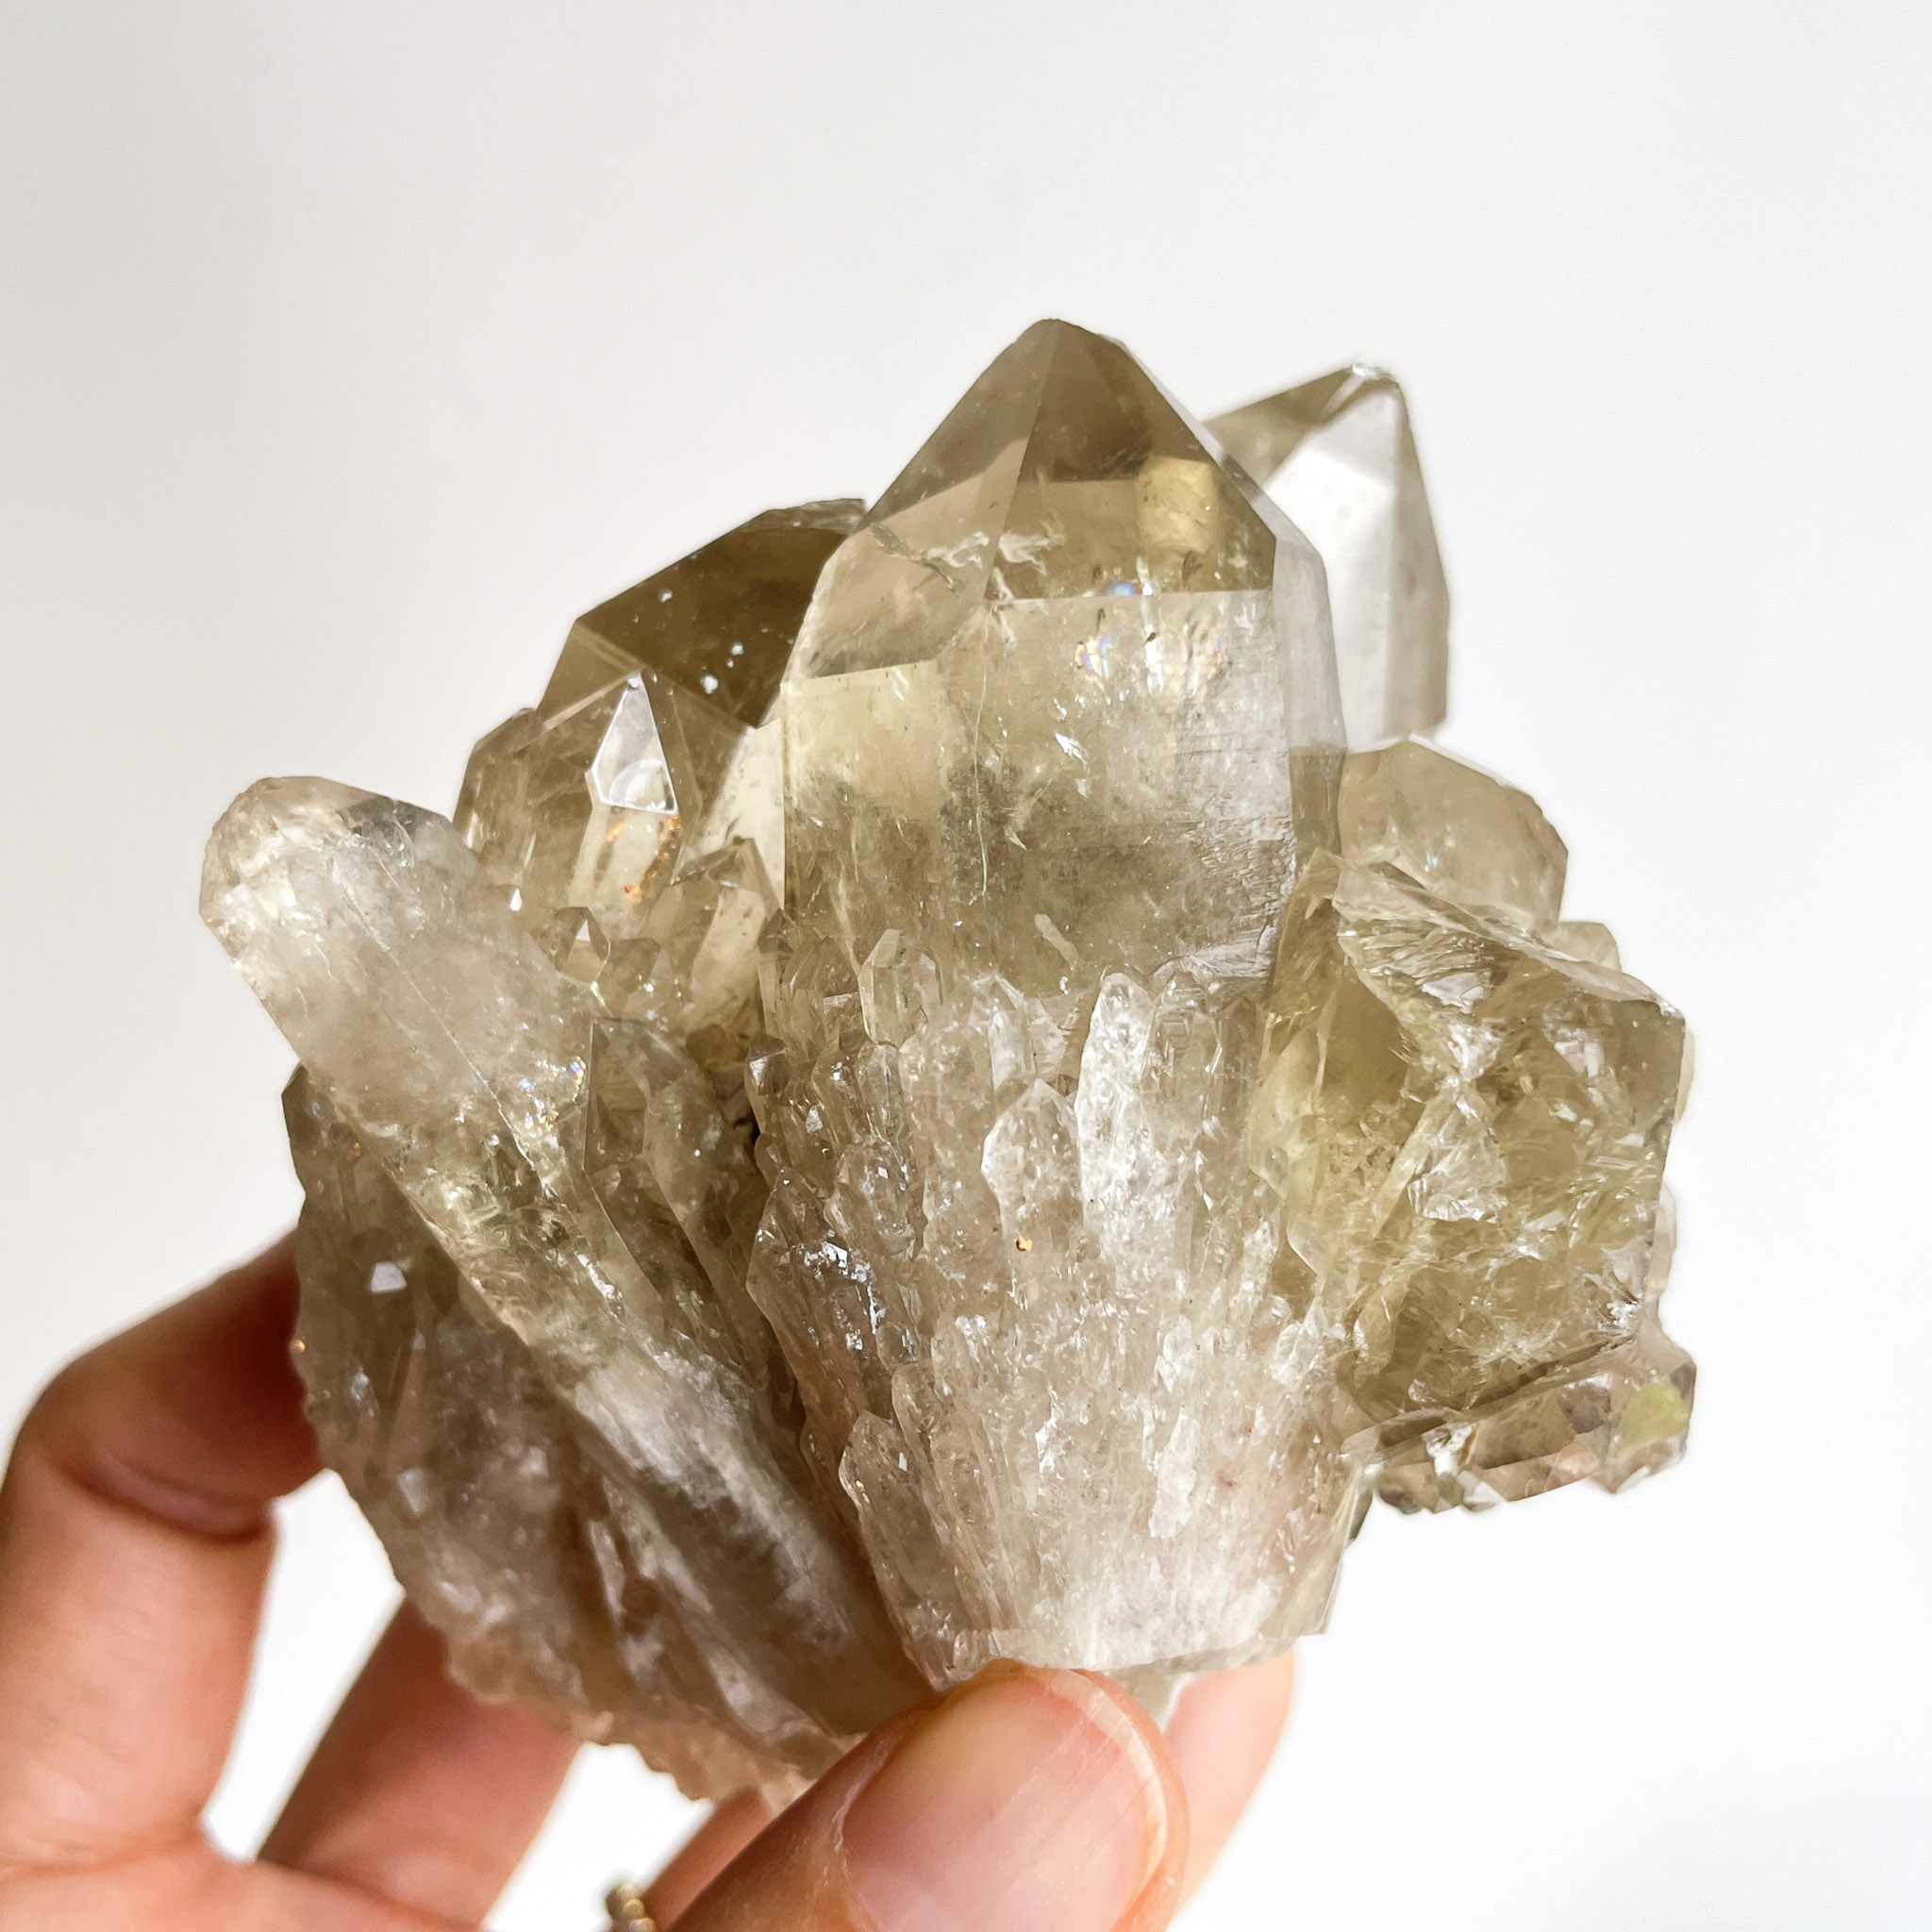 A person holding a large, translucent quartz crystal cluster with multiple intergrown pointed crystals against a light background.